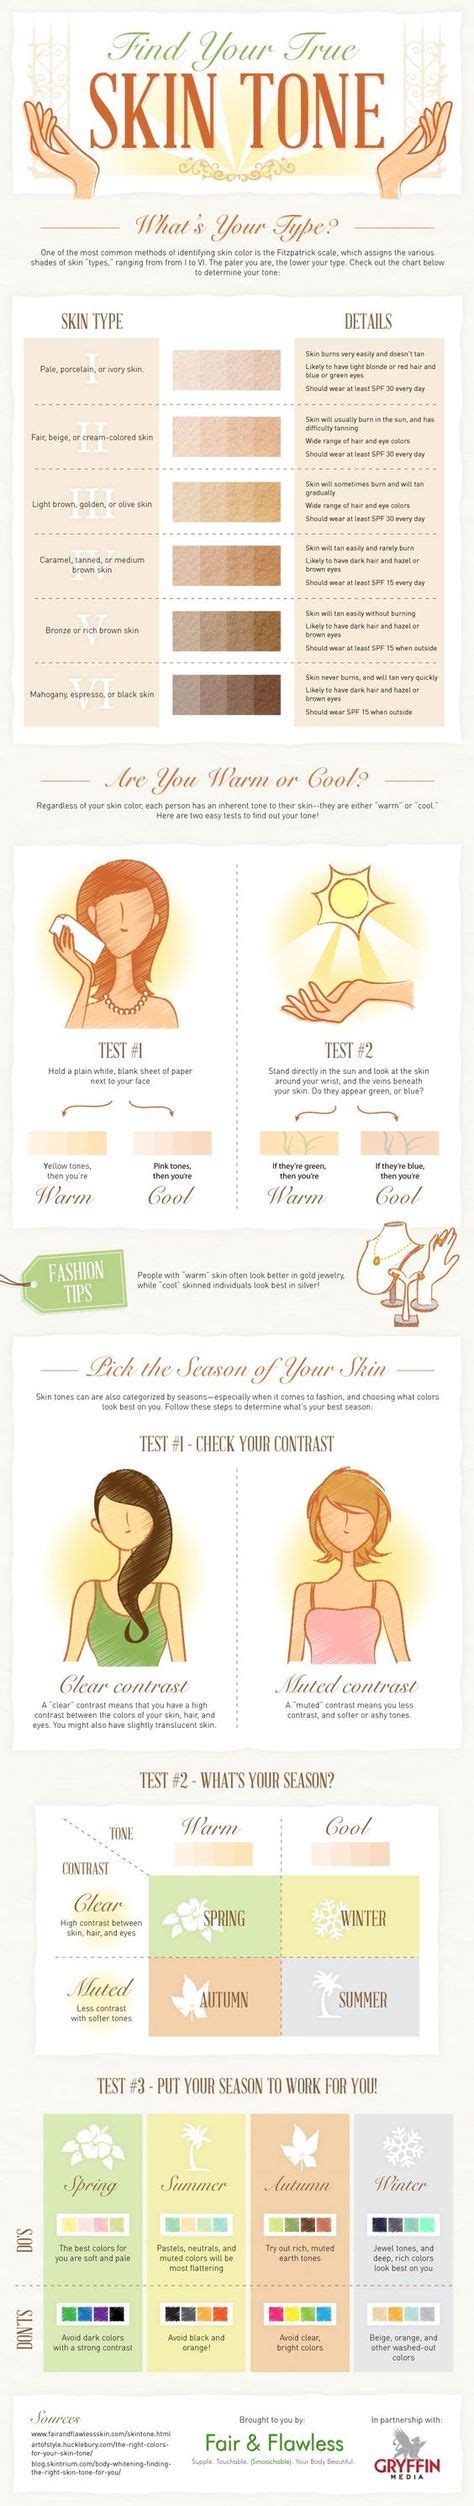 Skin Care How To Find Your Skin Tone This Infographic From